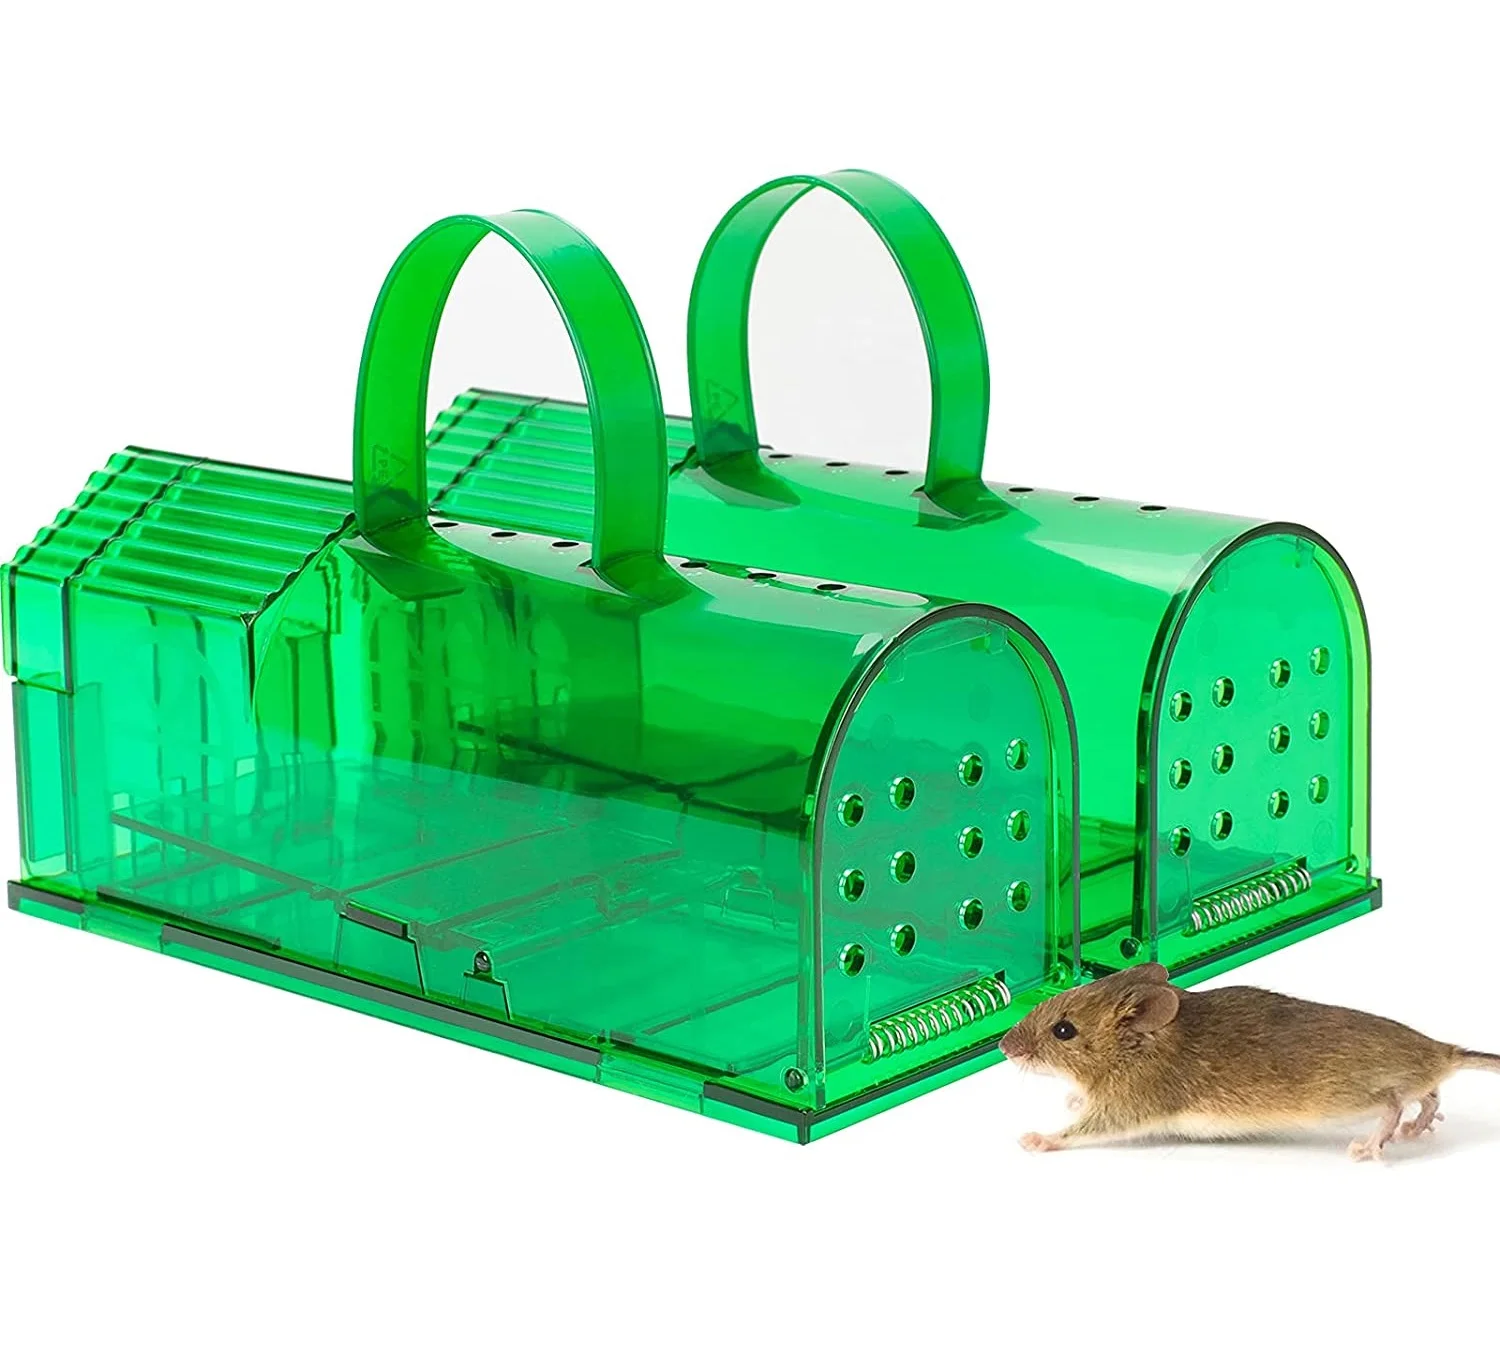 

Wholesale source factory supply plastic portable humane live mouse trap smart rat trap cage for mouse mice rat cage trap, See-through green/tawney